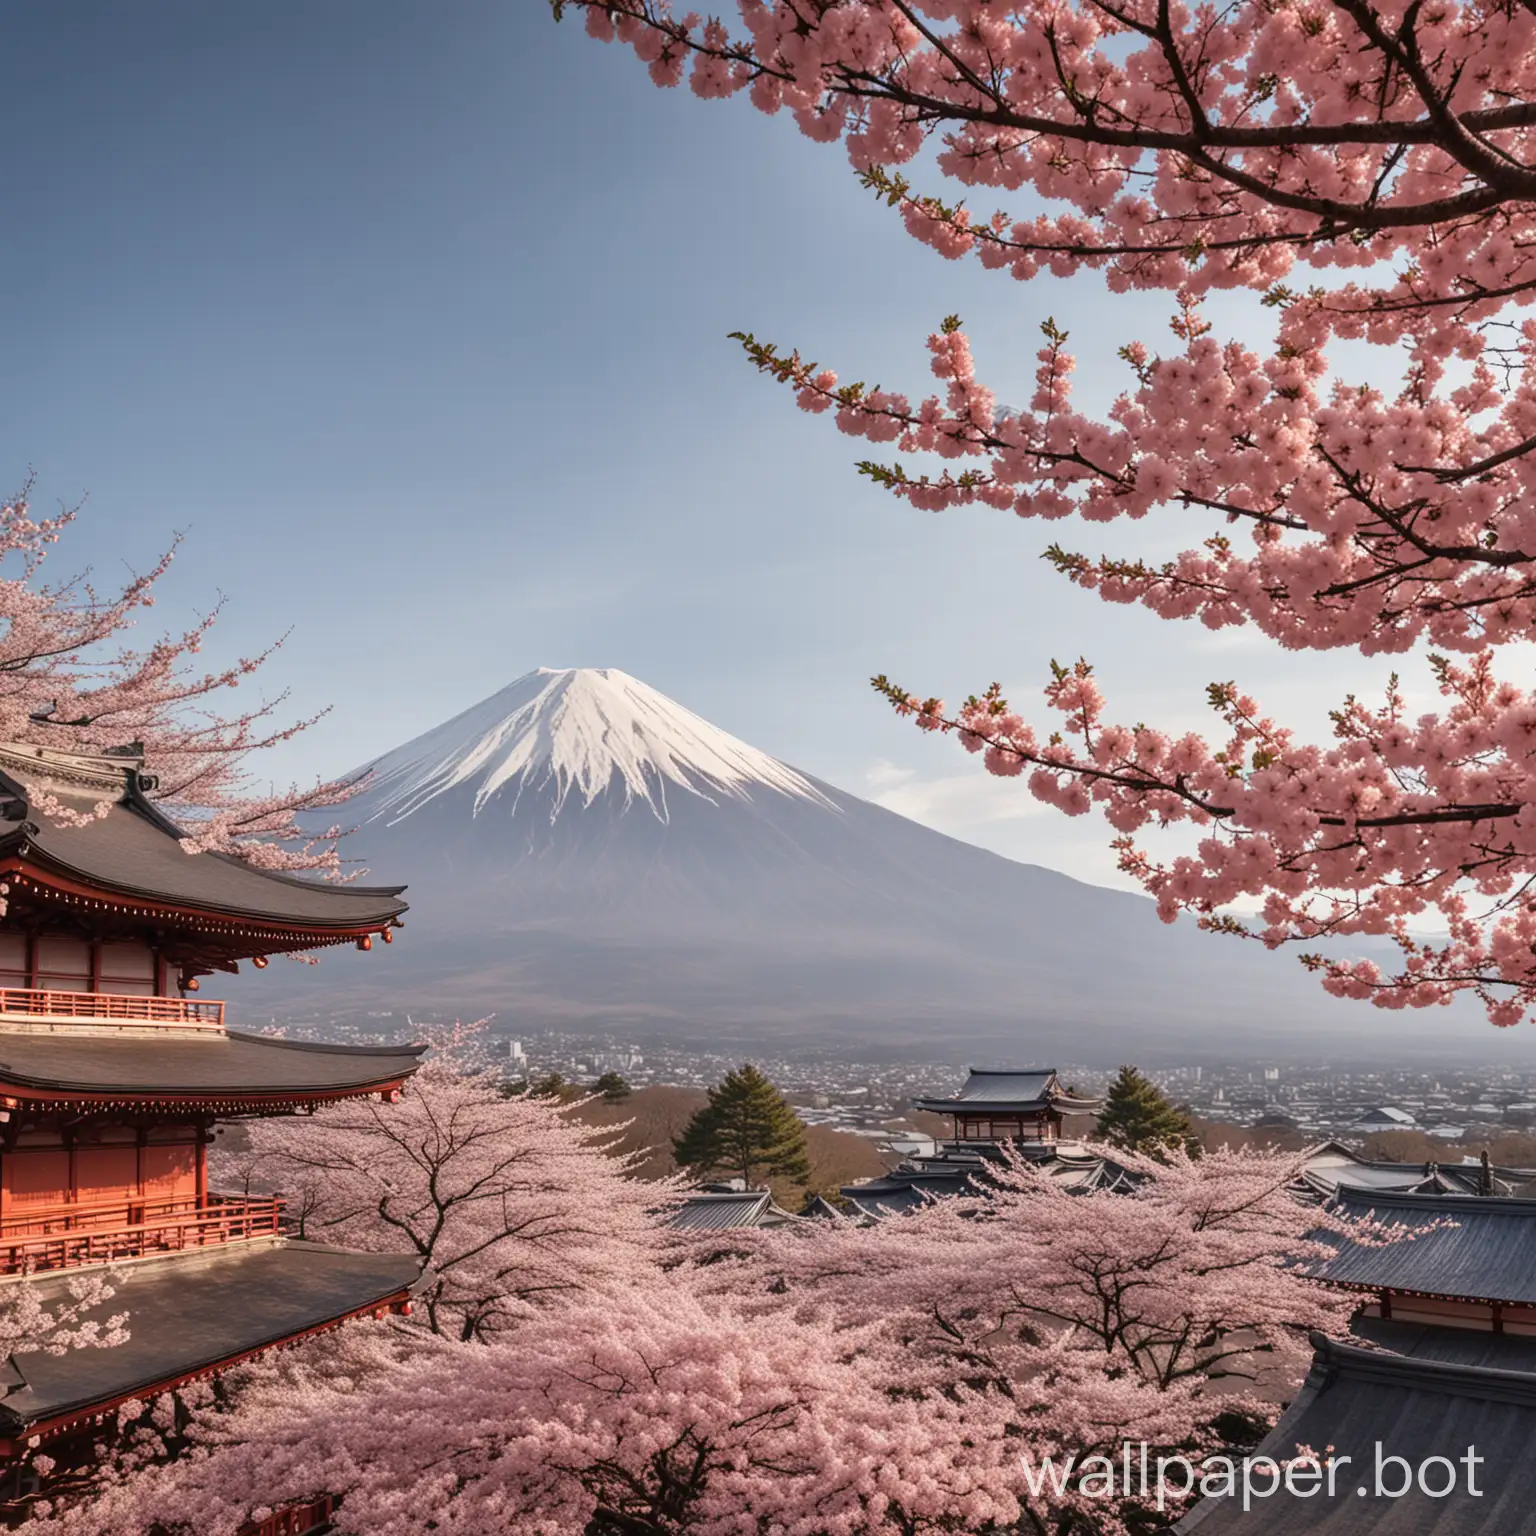 Iconic-Mount-Fuji-Overlooking-Cherry-Blossom-Temple